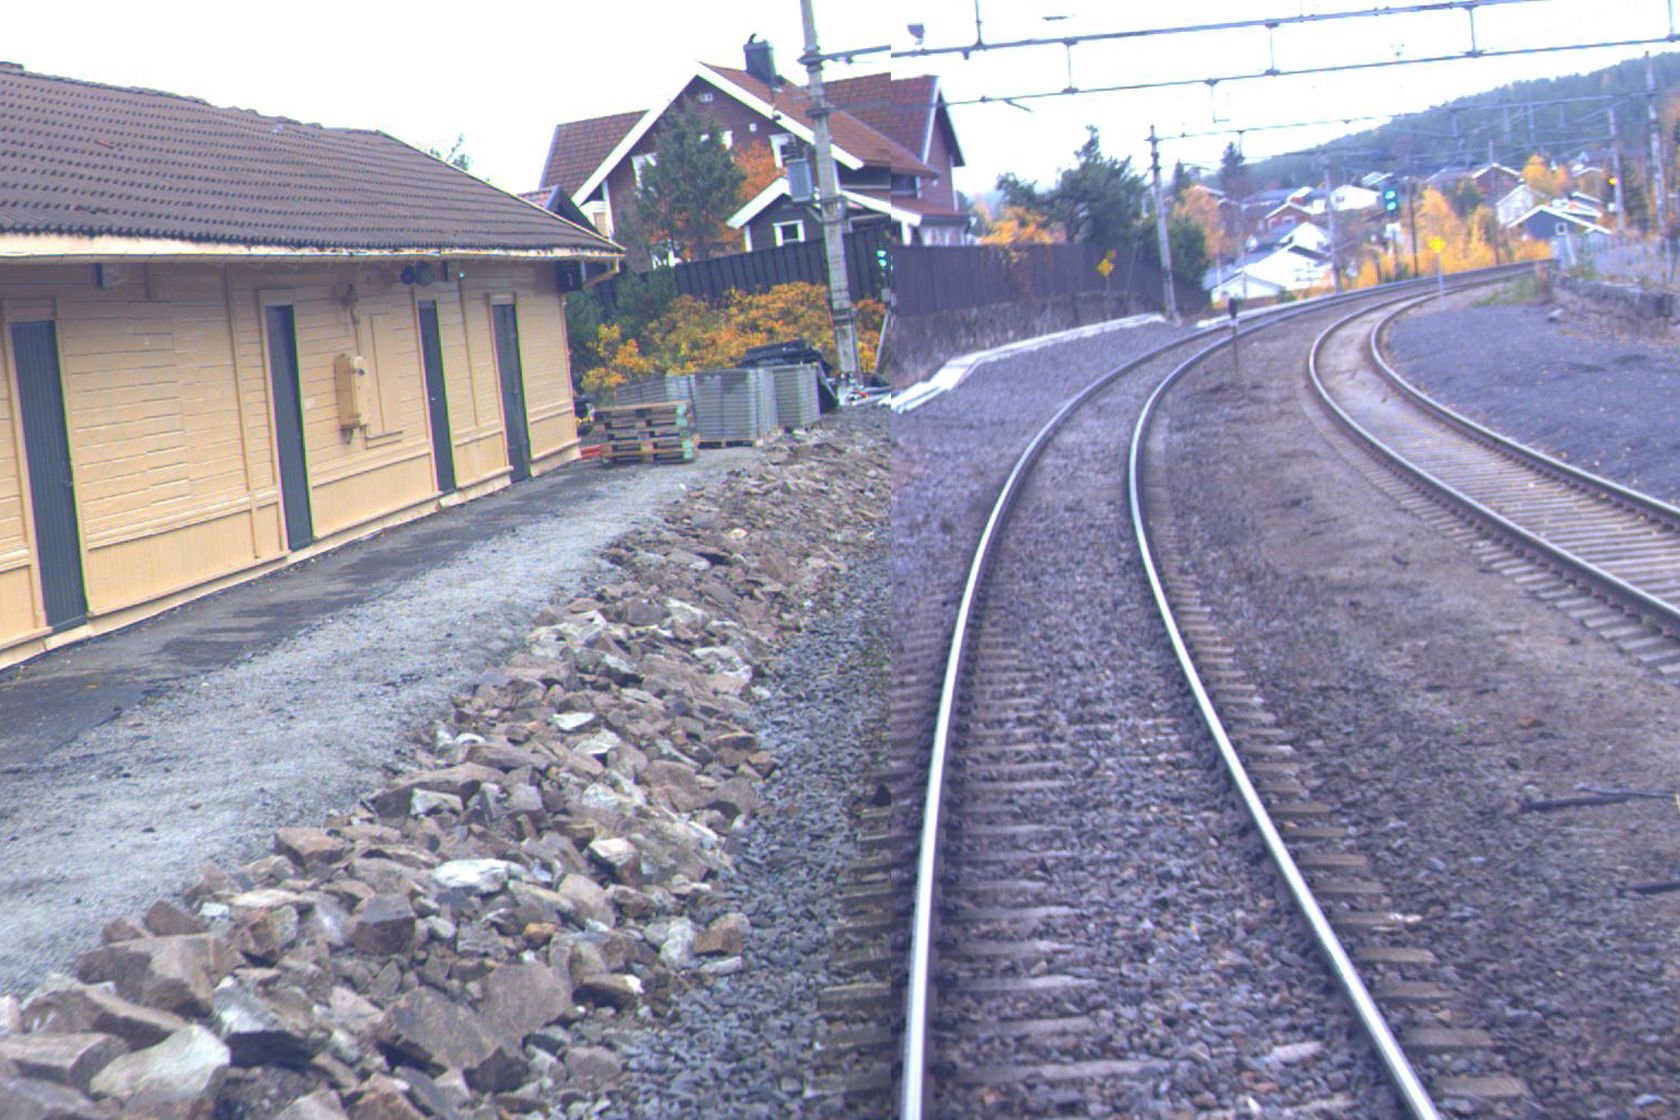 Tracks and building at Monsrud station